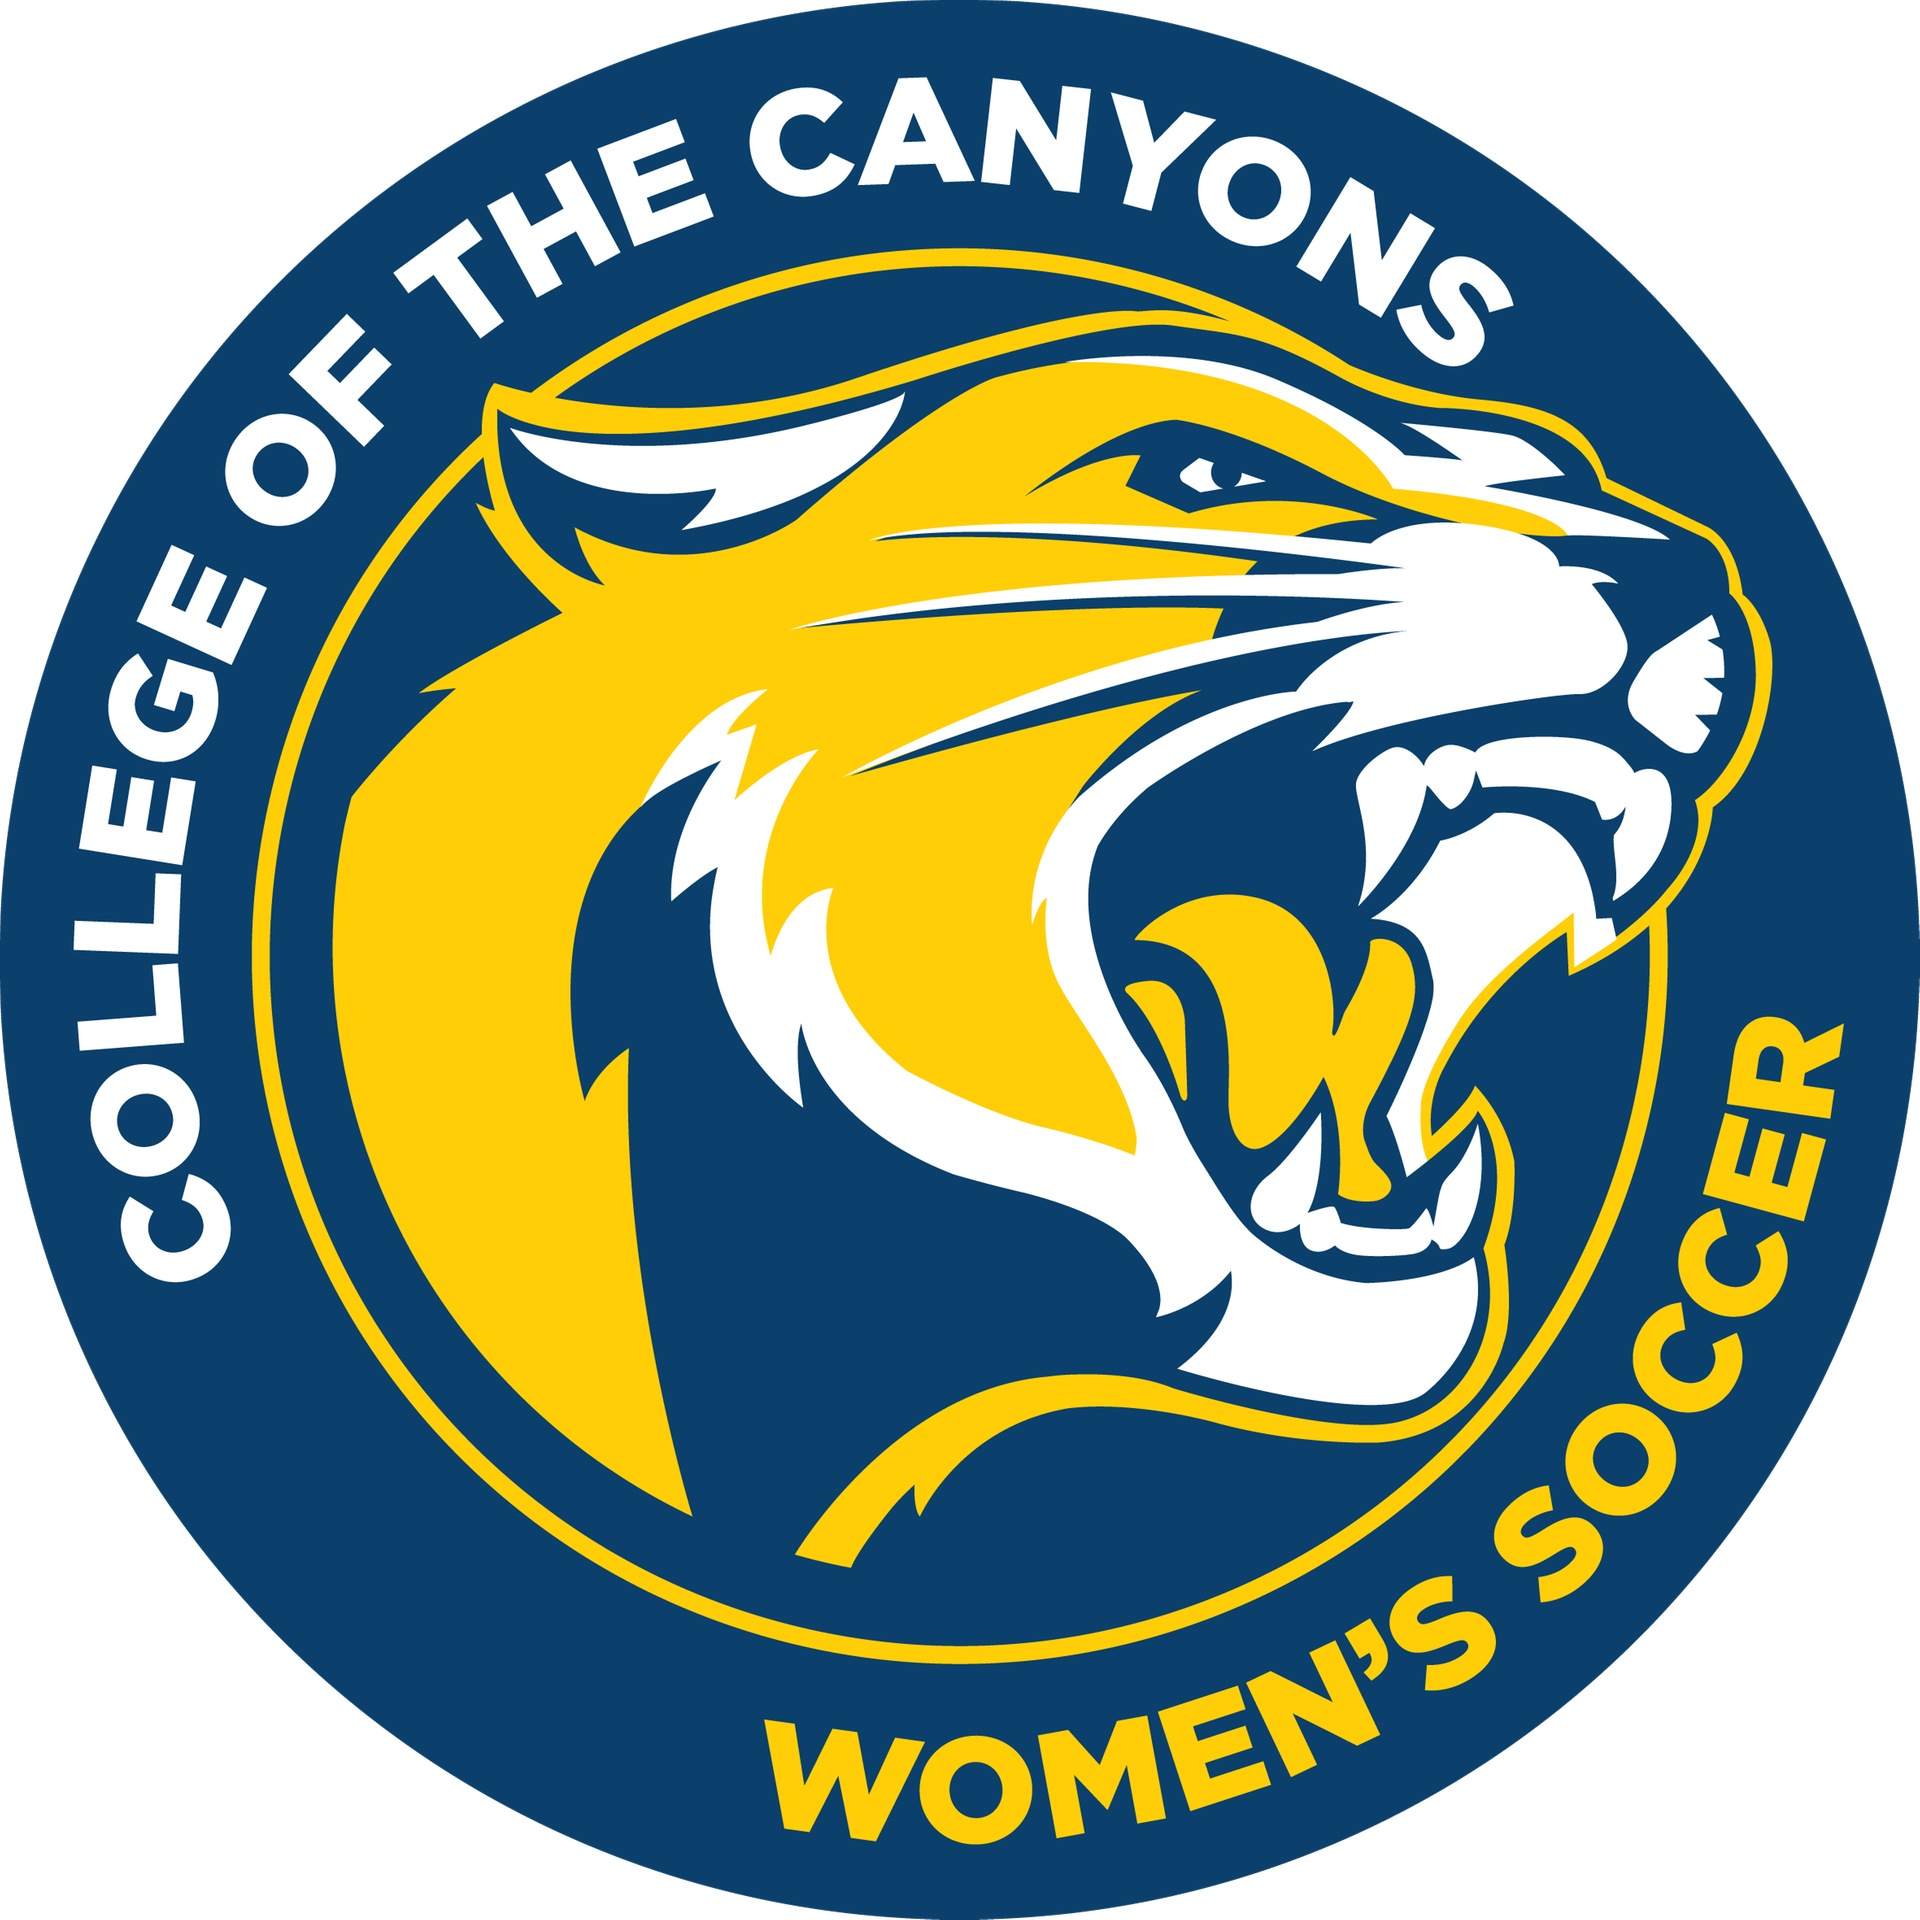 College of the Canyons women's soccer athletic logo.